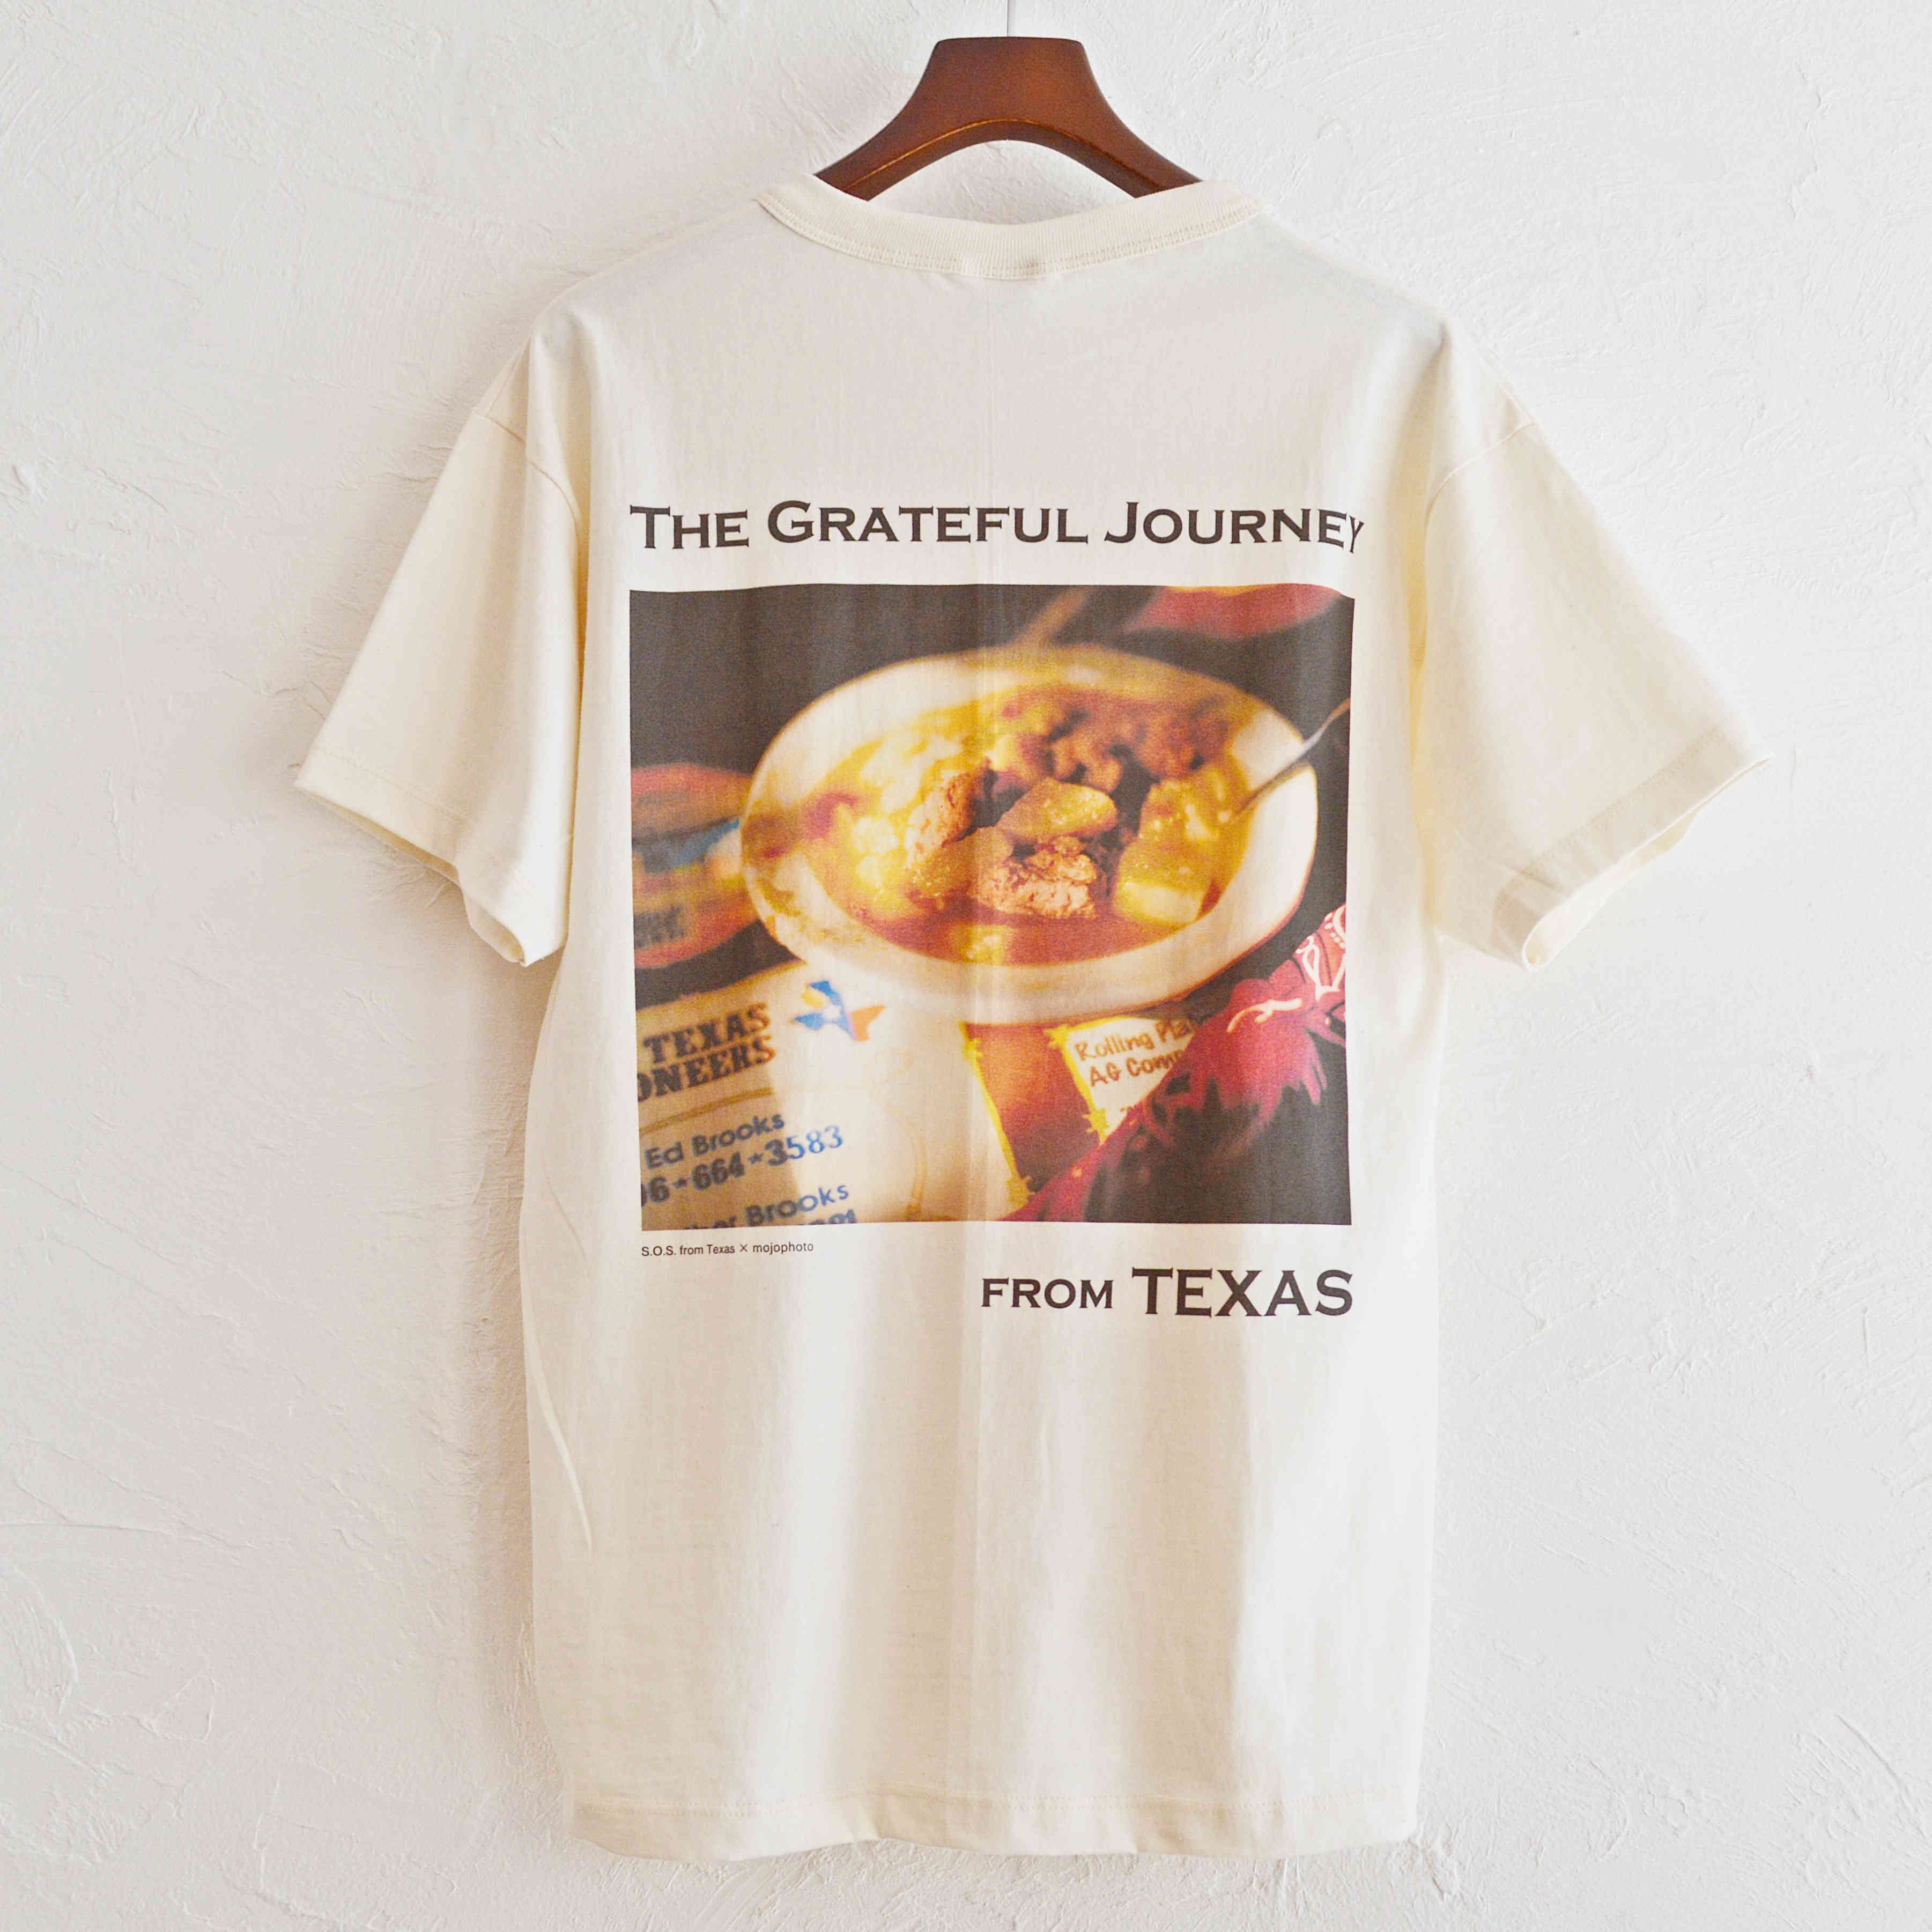 S.O.S. from Texas×mojophoto / ORGANIC COTTON 100% S/S CREW TEE THE GRATEFUL JOURNEY FROM TEXAS 『FOOD』